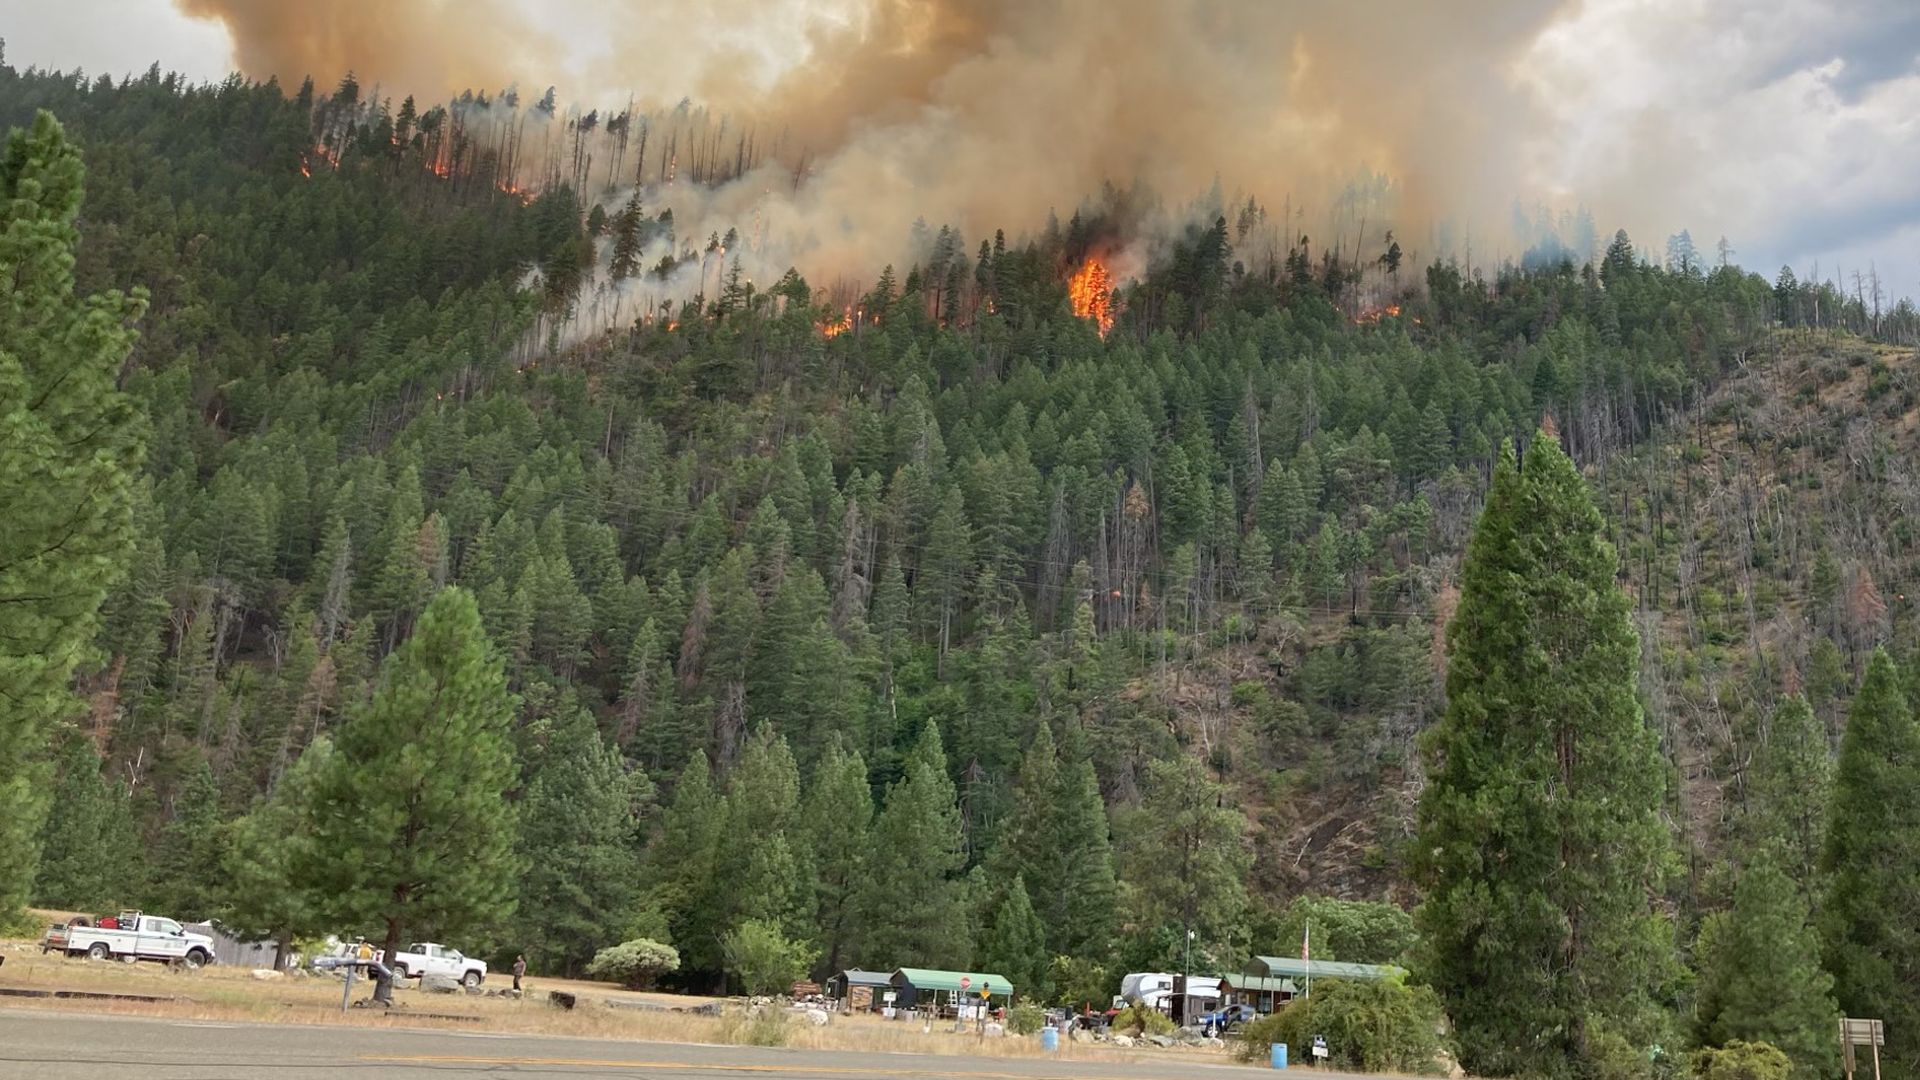 The Head Fire burns in forest near a community in Siskiyou County, California.